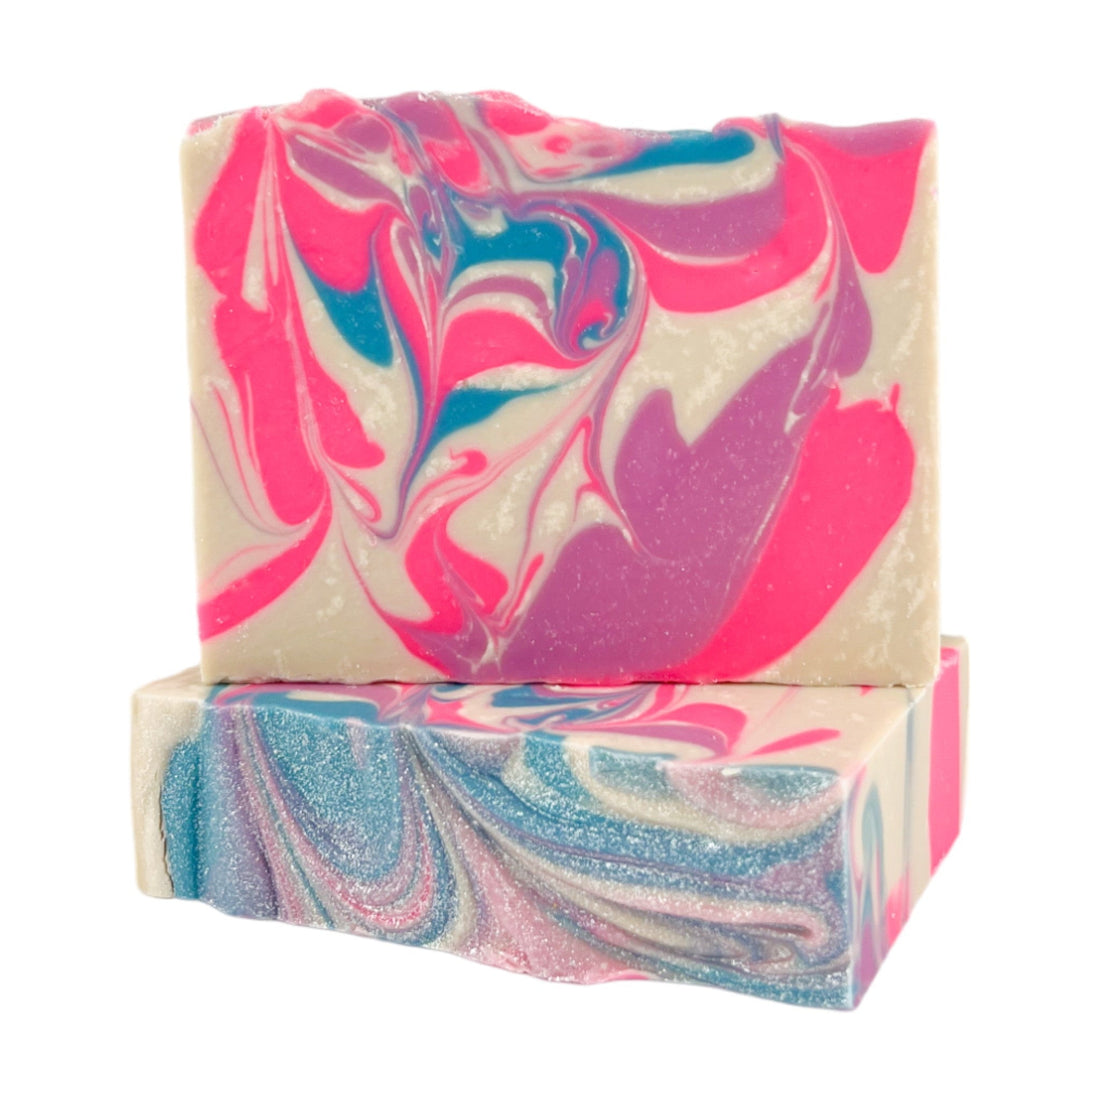 Hippie Chick -Bar Soap - Old Town Soap Co.